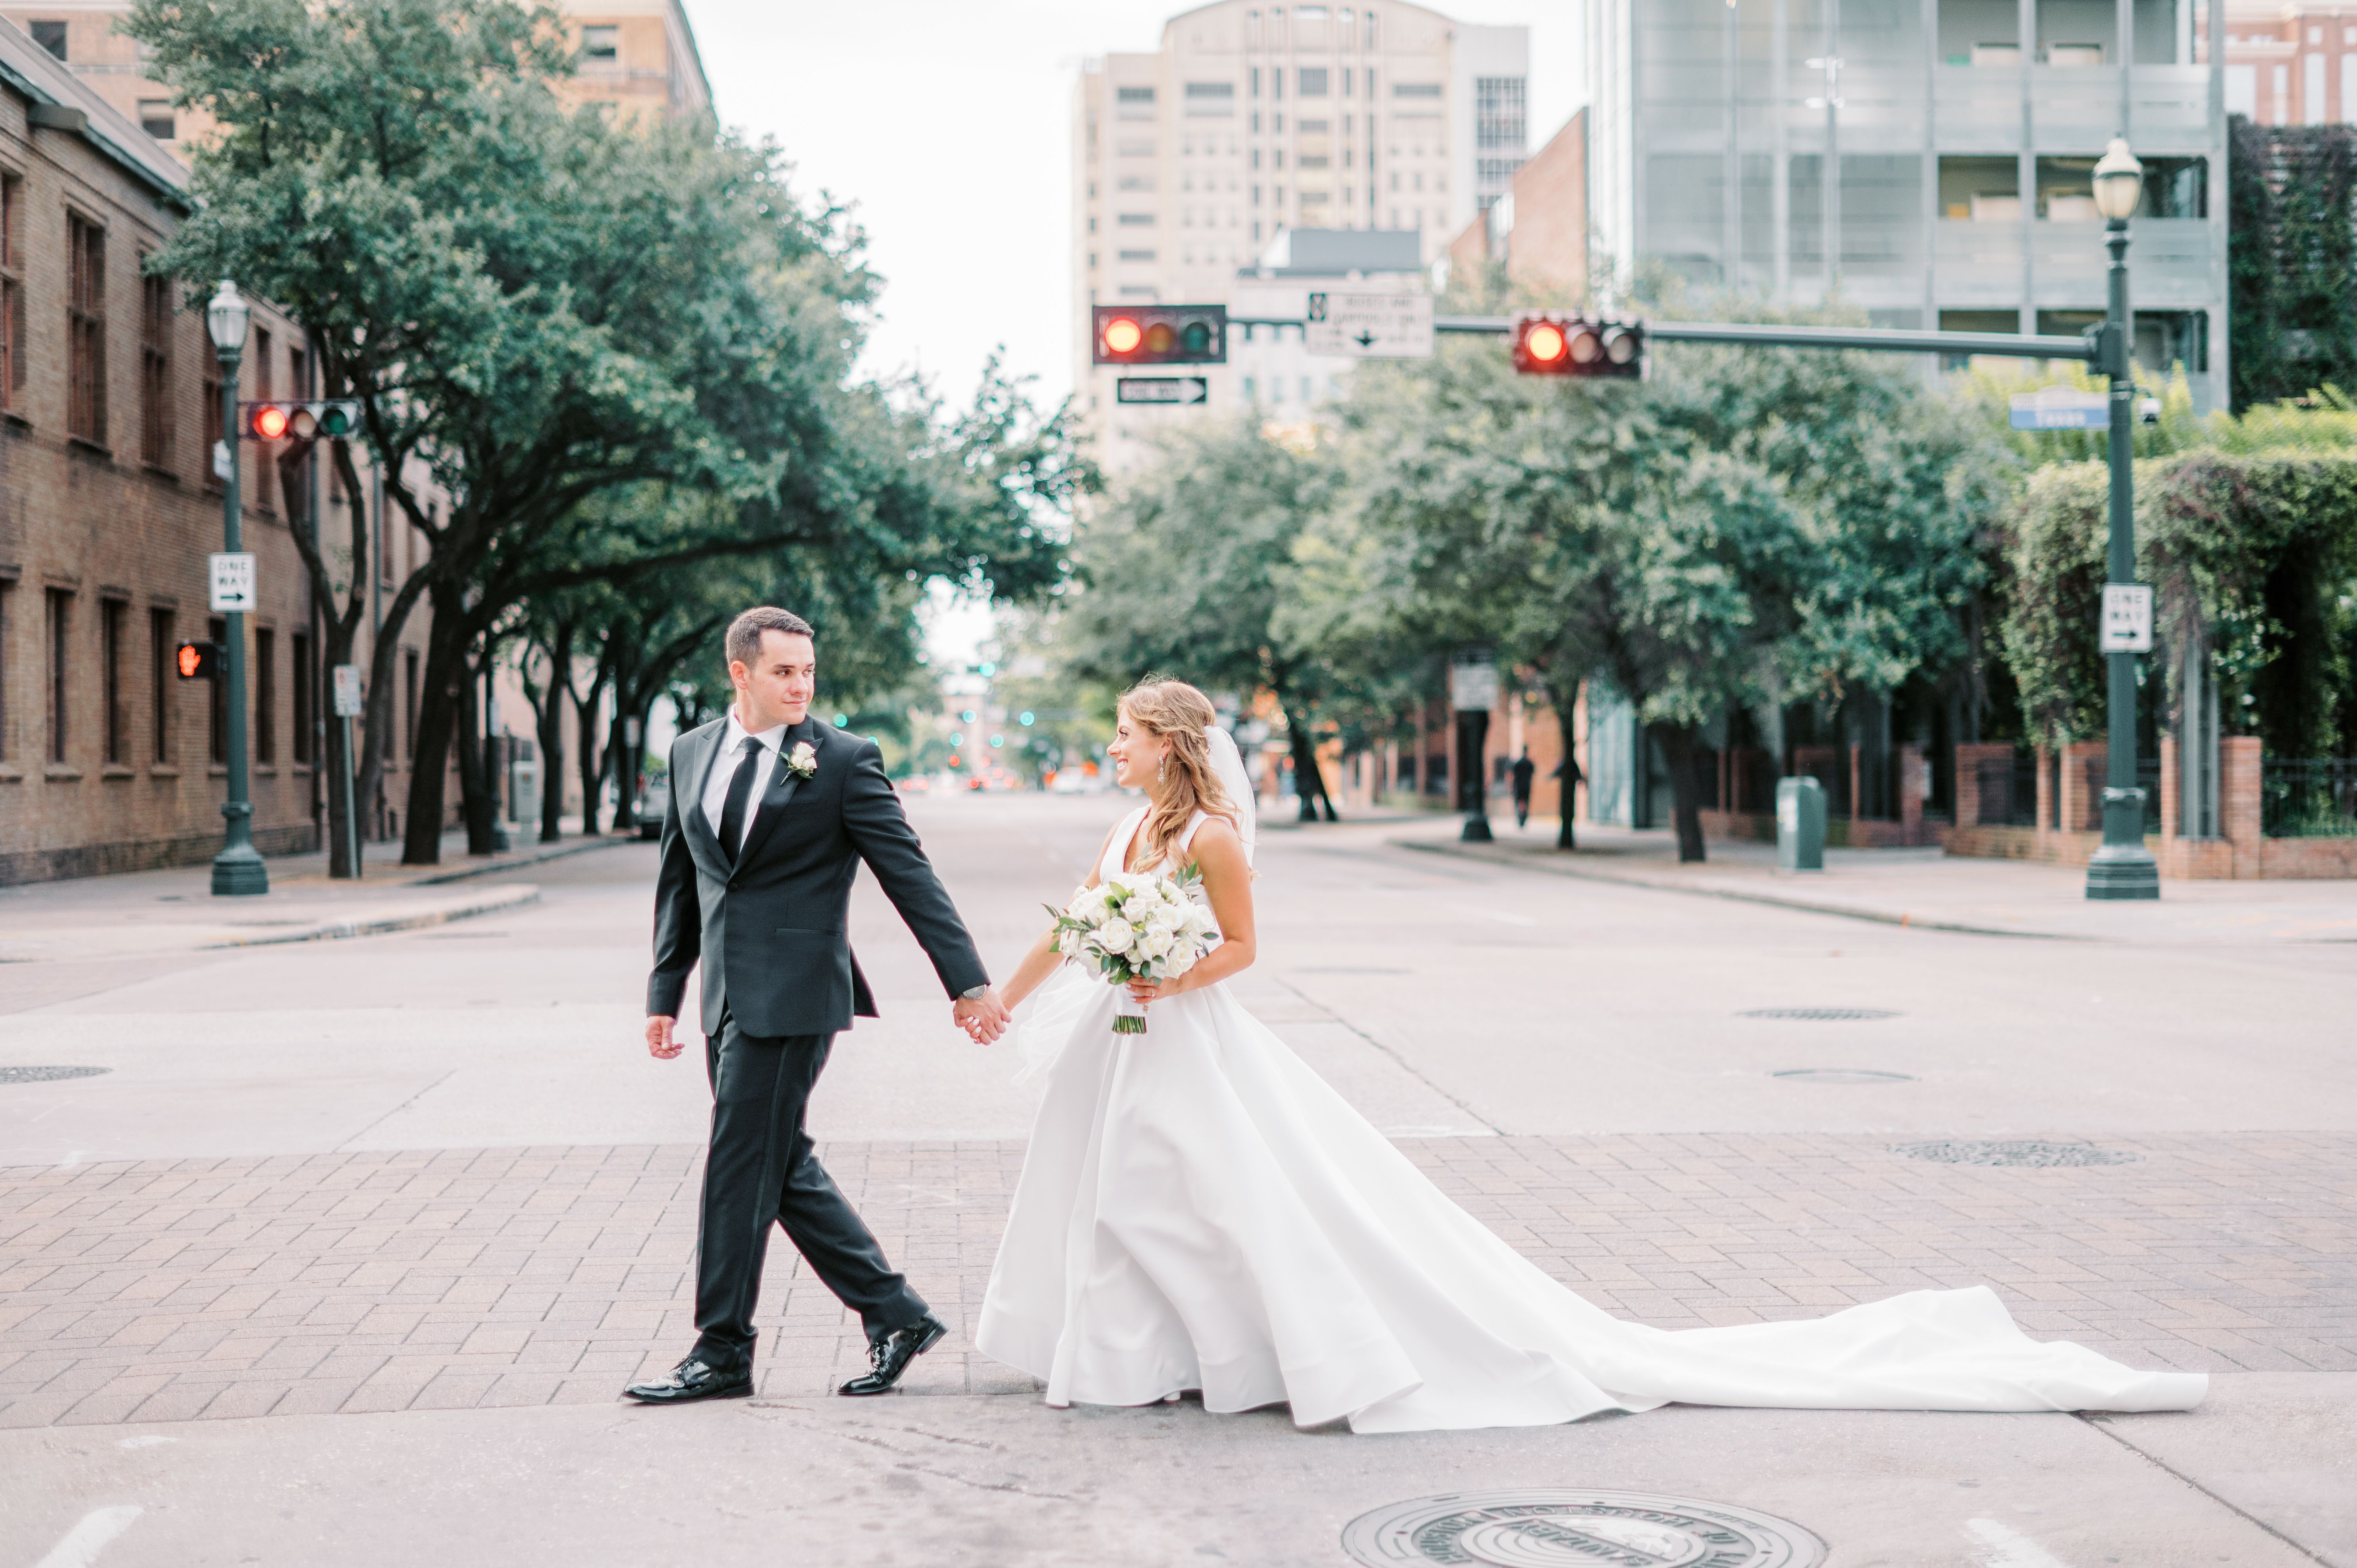 Bride and groom walk across the street in Downtown Houston during the day.